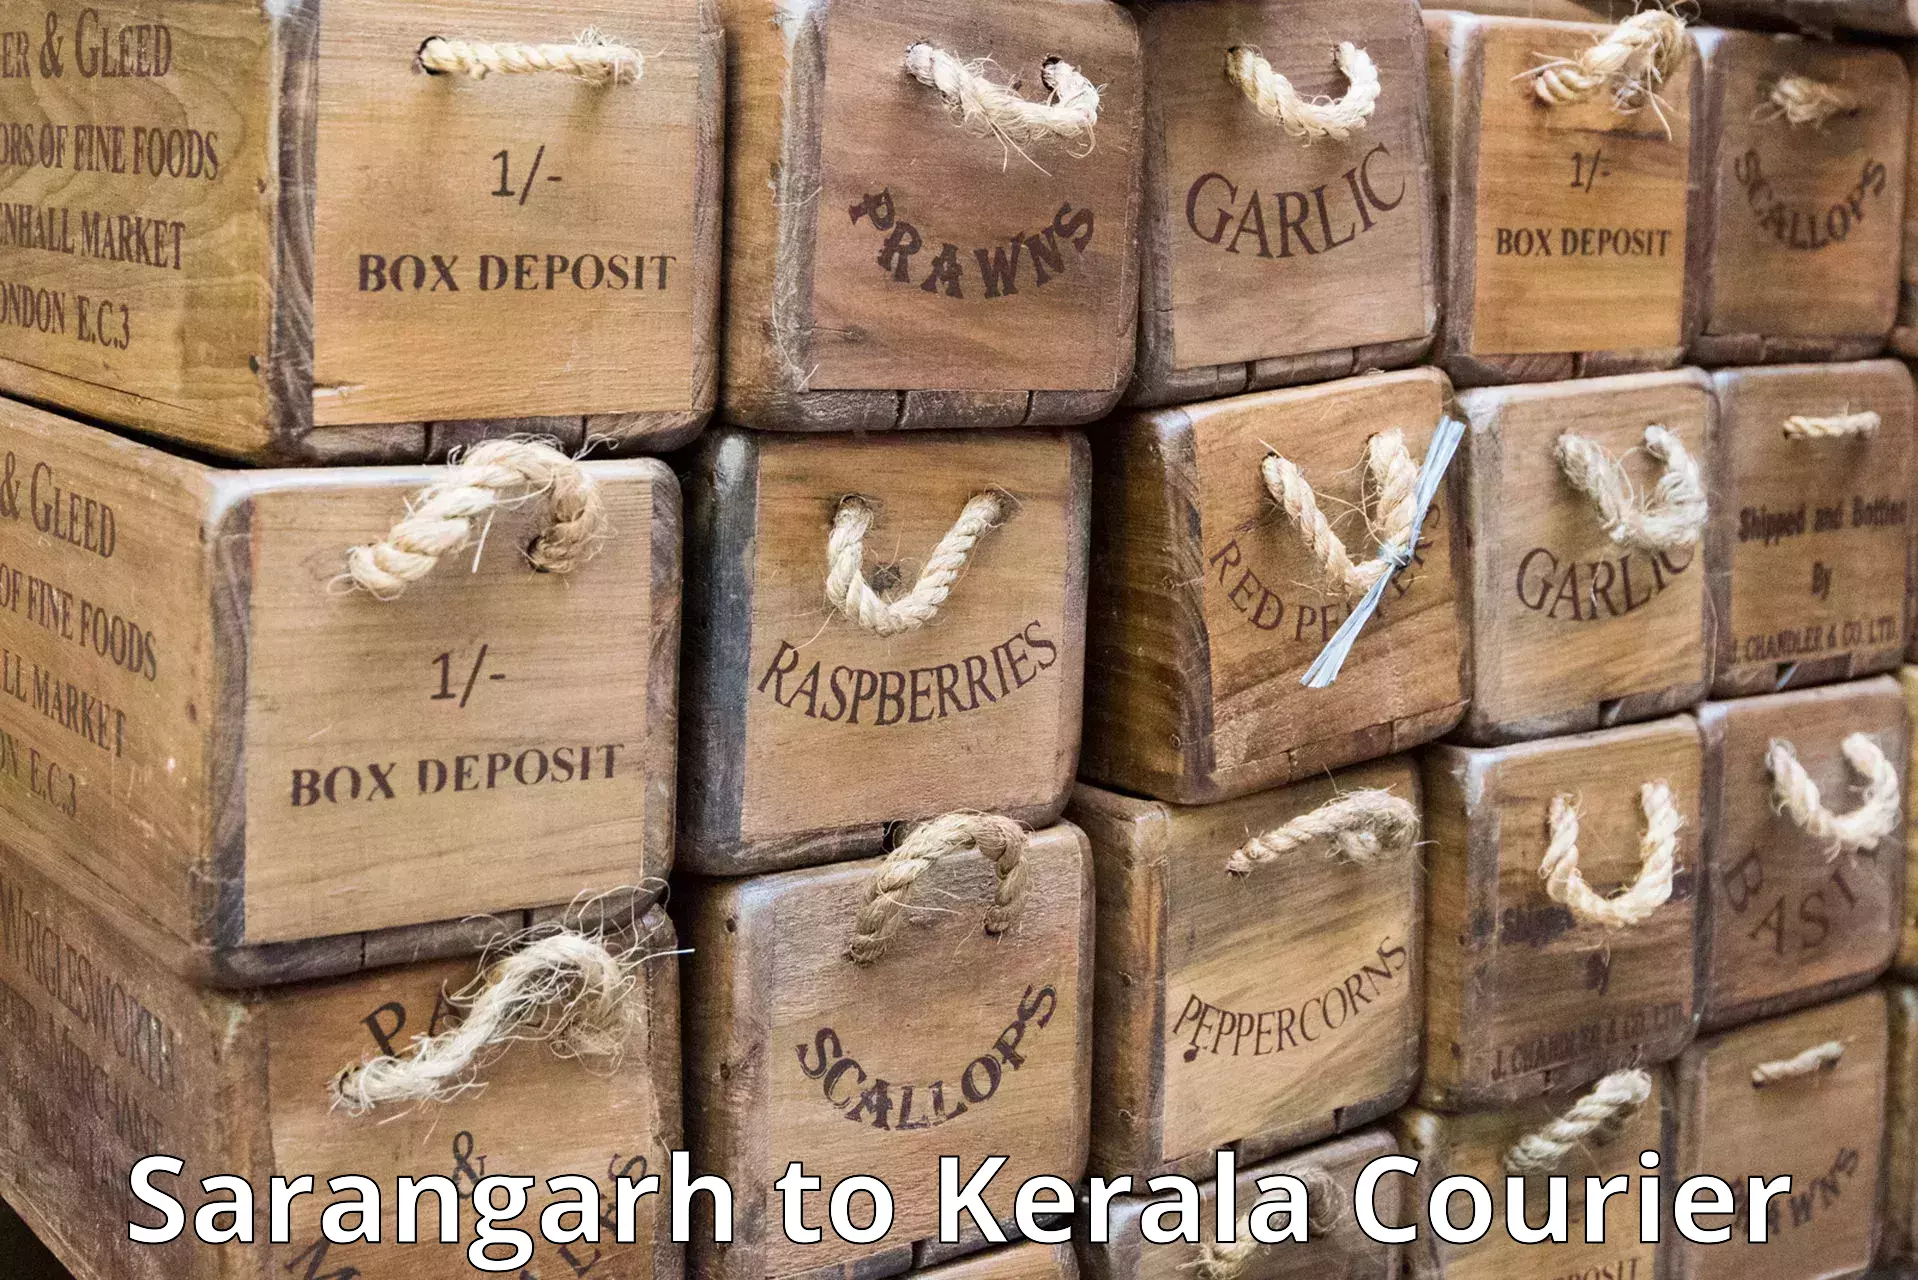 User-friendly delivery service Sarangarh to Kerala